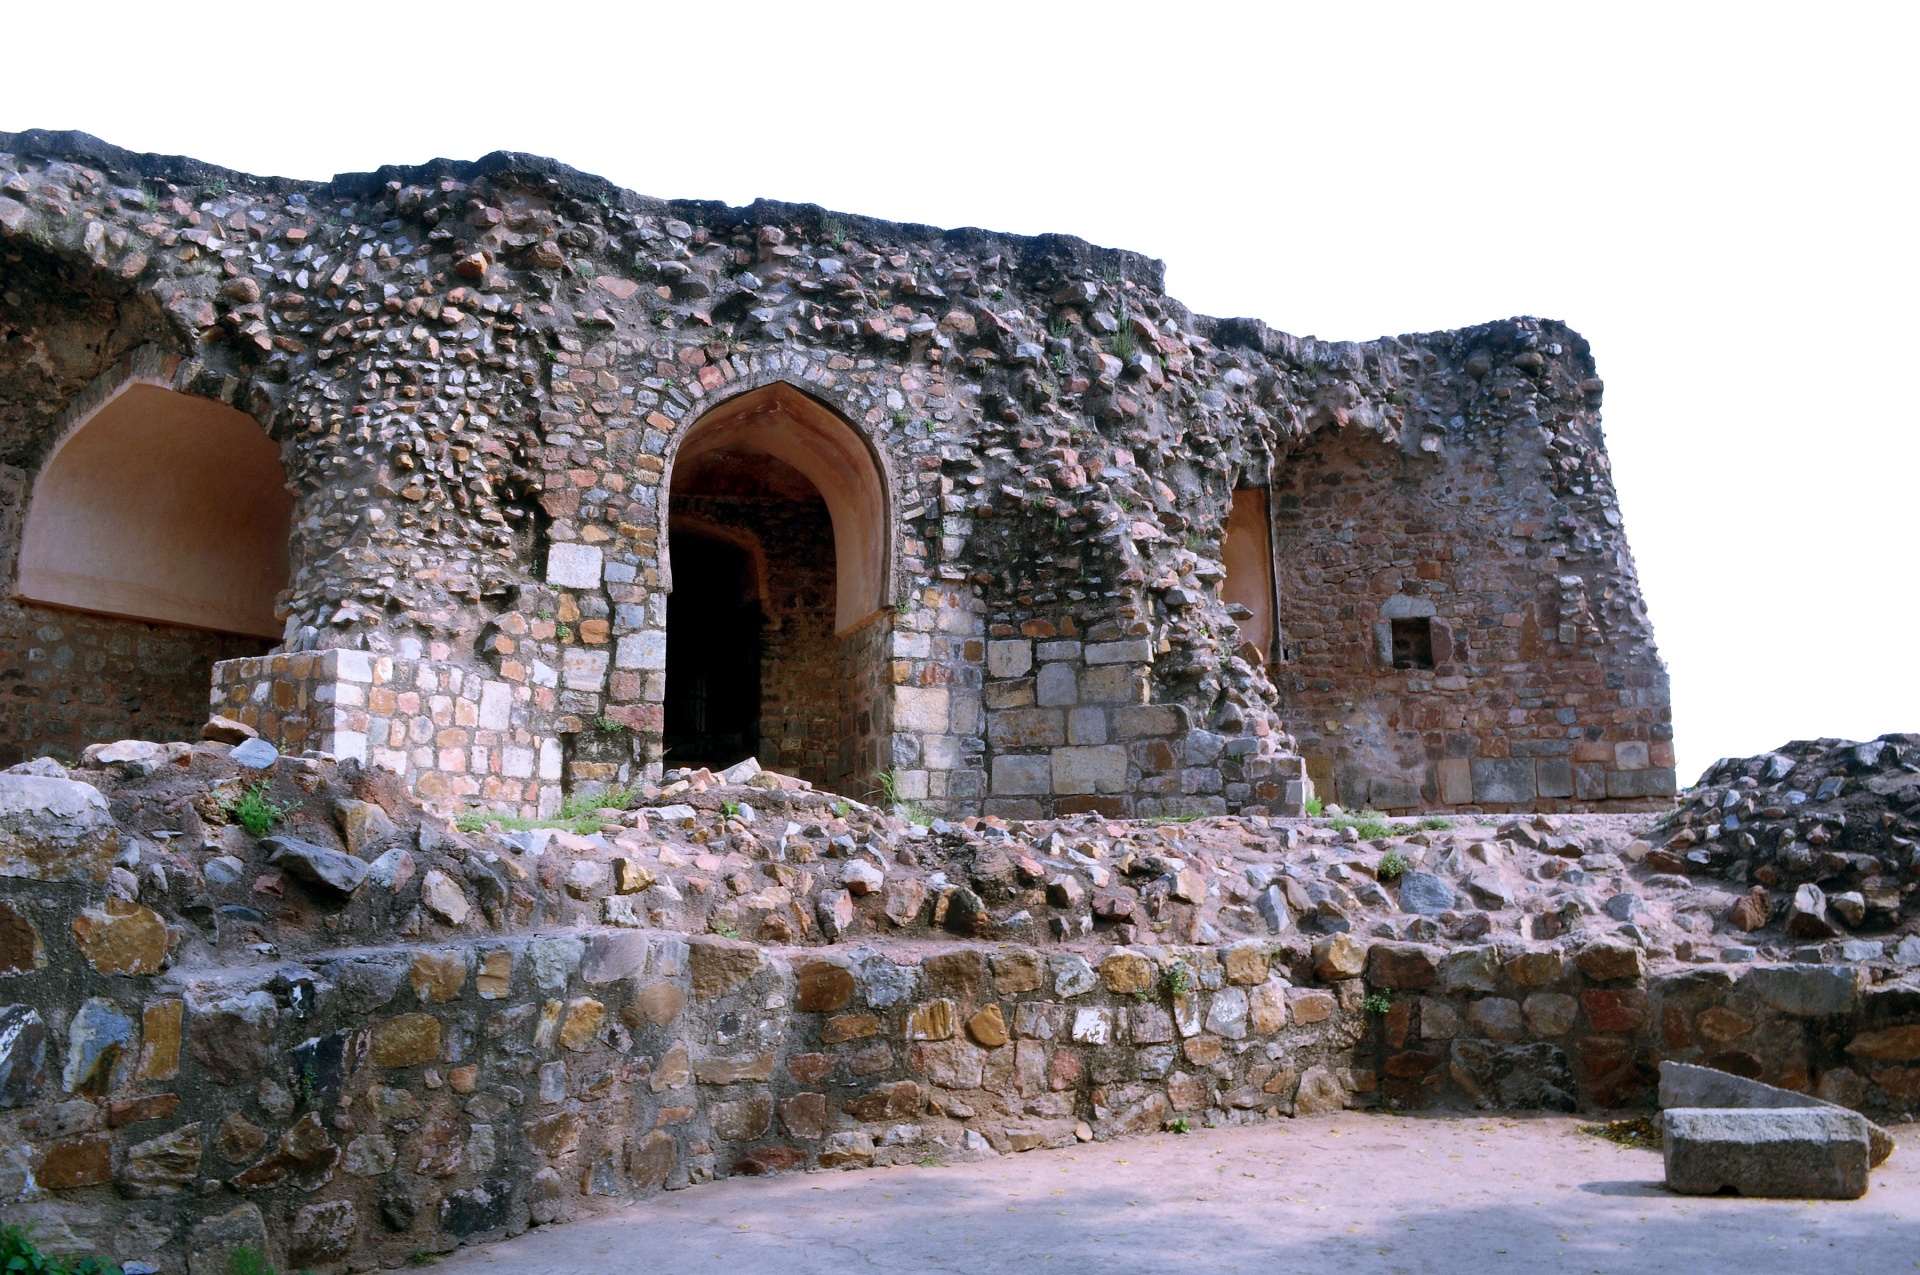 Ruins of 15th century Indian fort